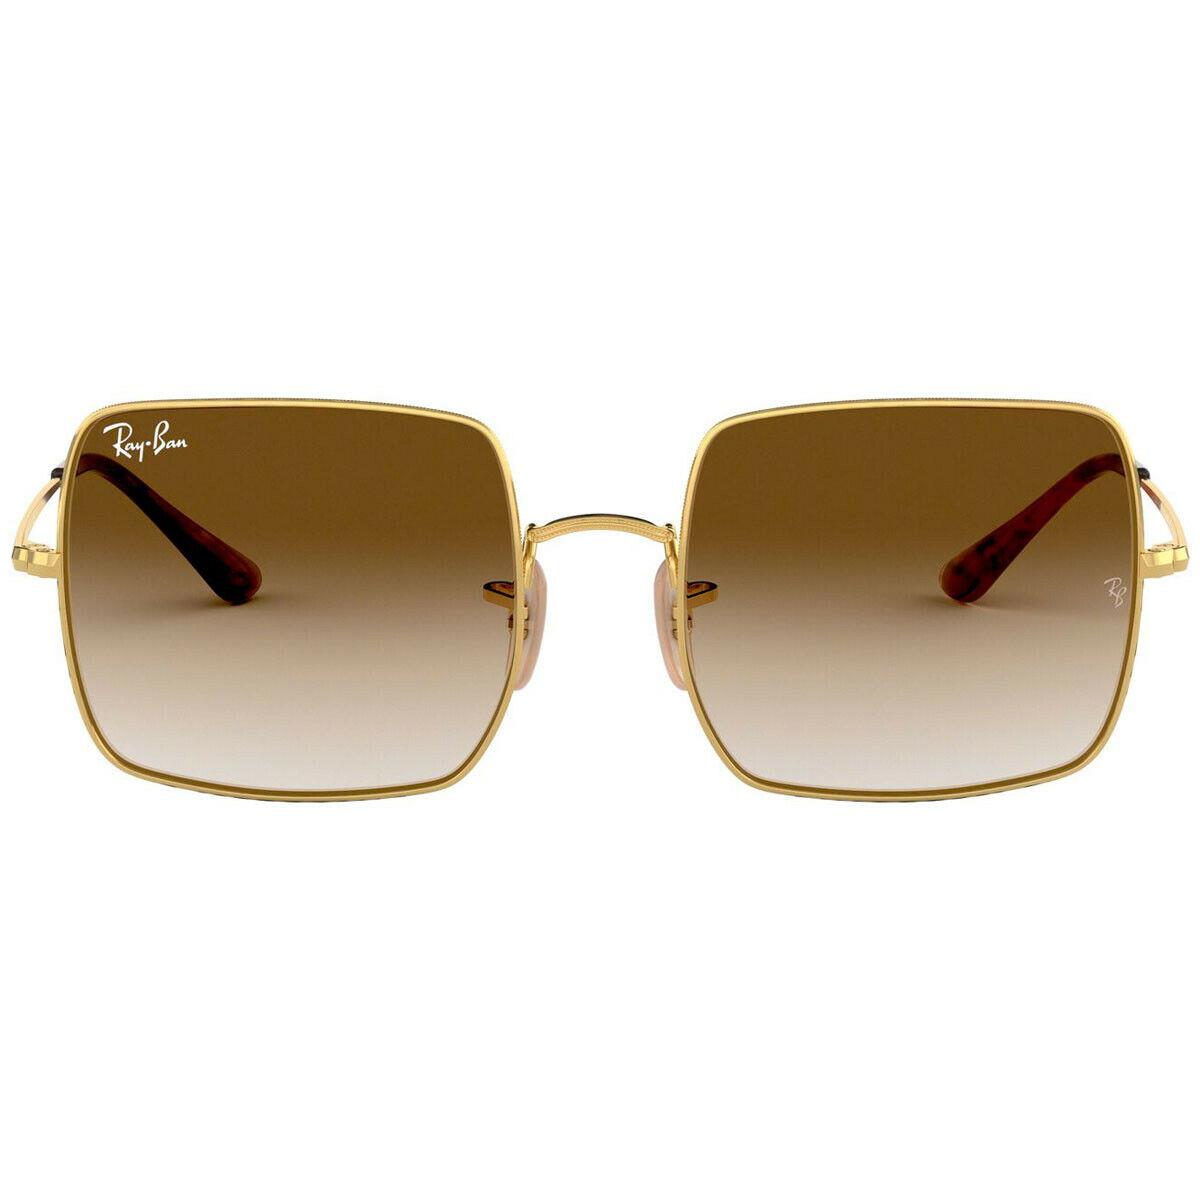 Ray-ban Square Classic Brown Lenses Gold Frame Sunglasses RB1971 914751-54